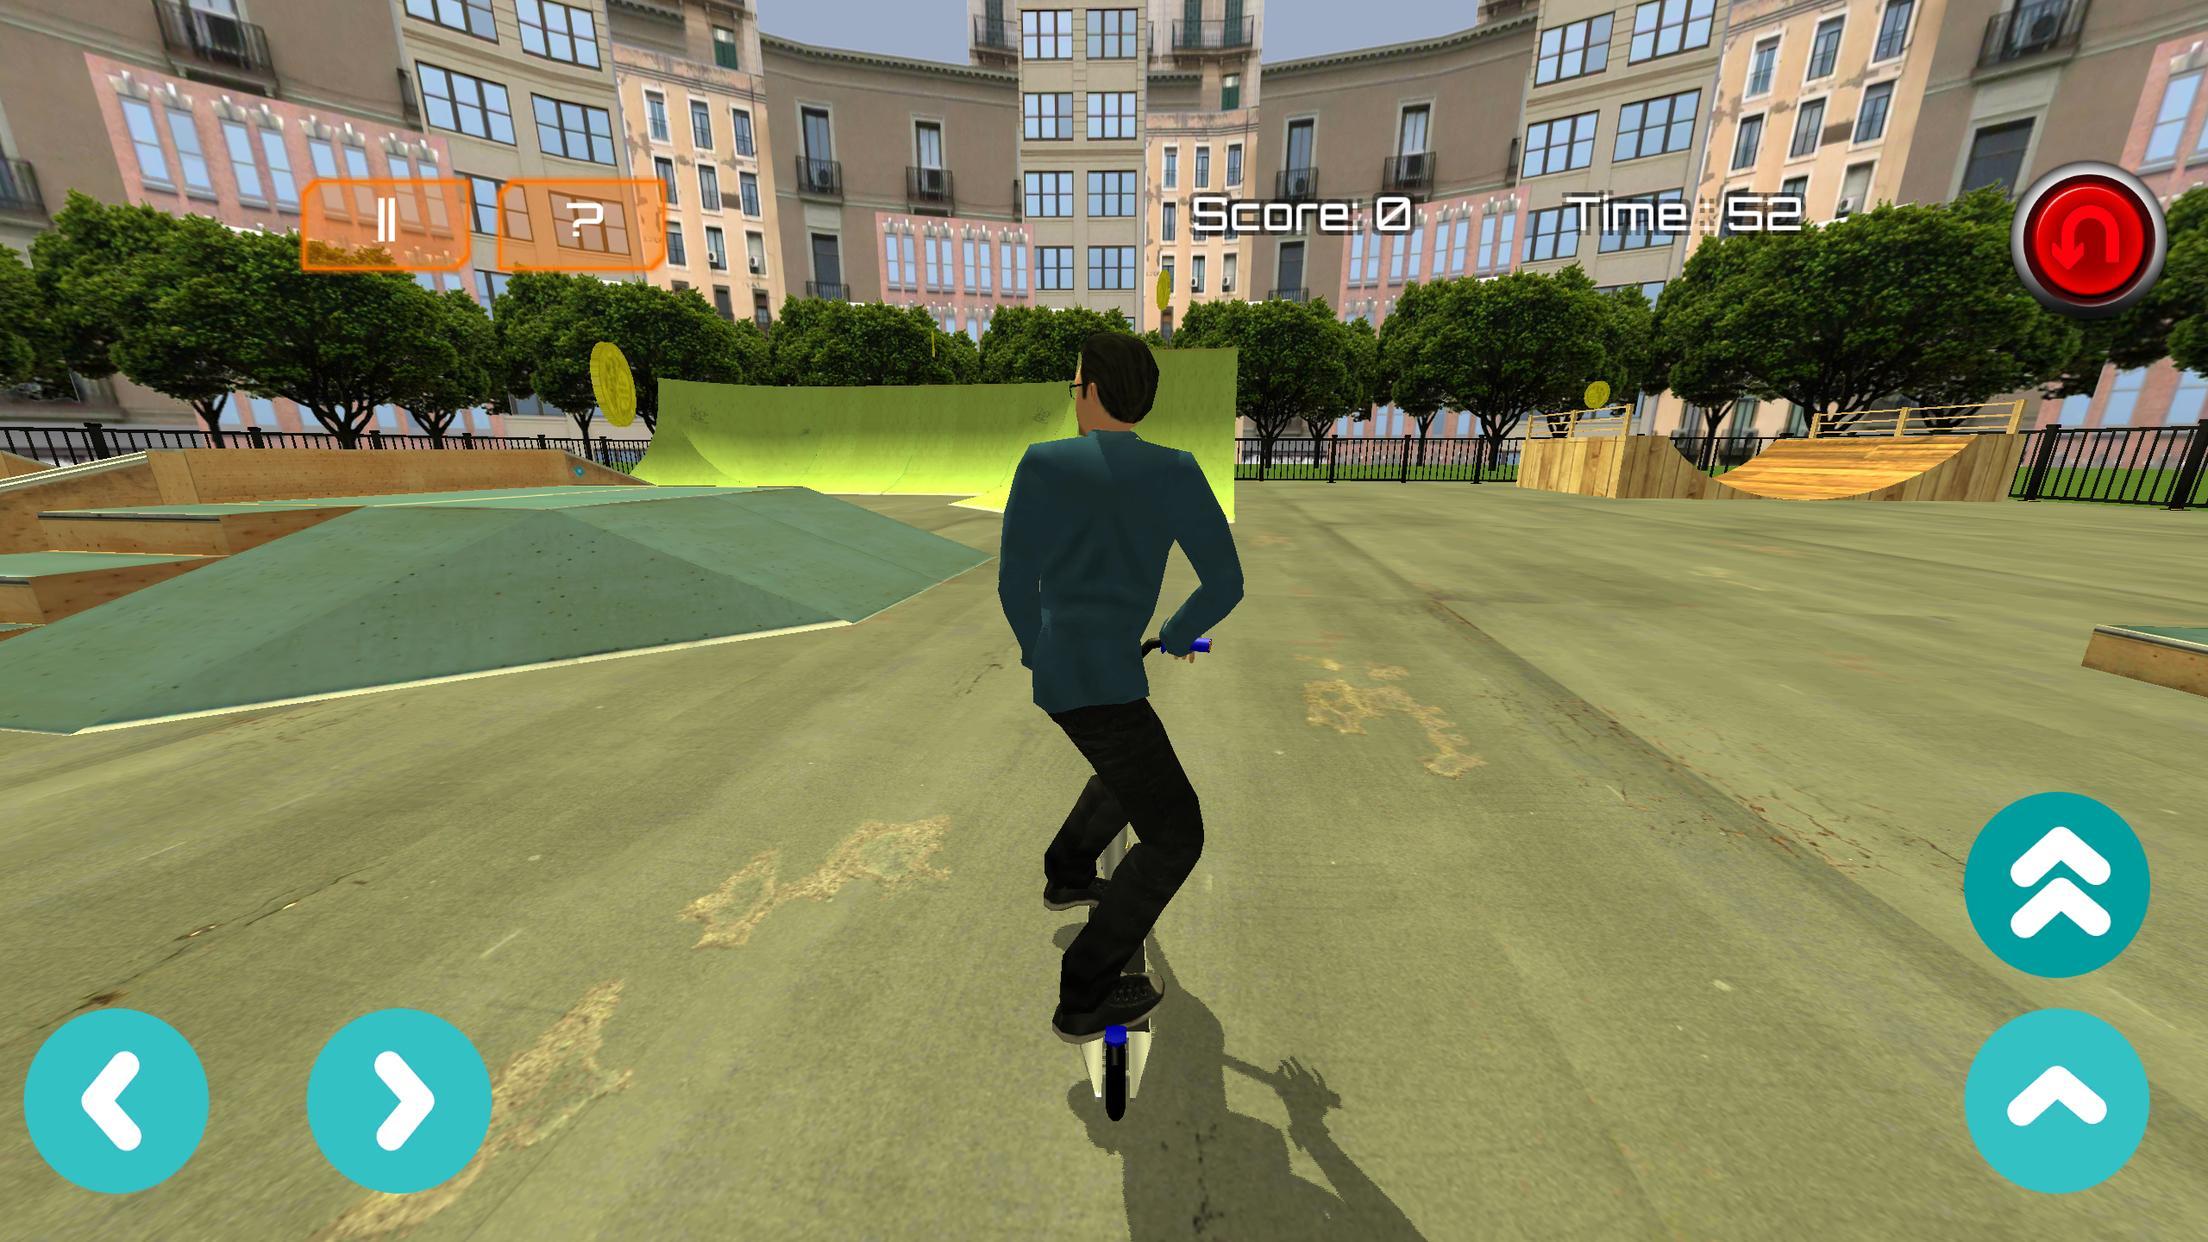 Screenshot 1 of Freestyle-Scooter 6